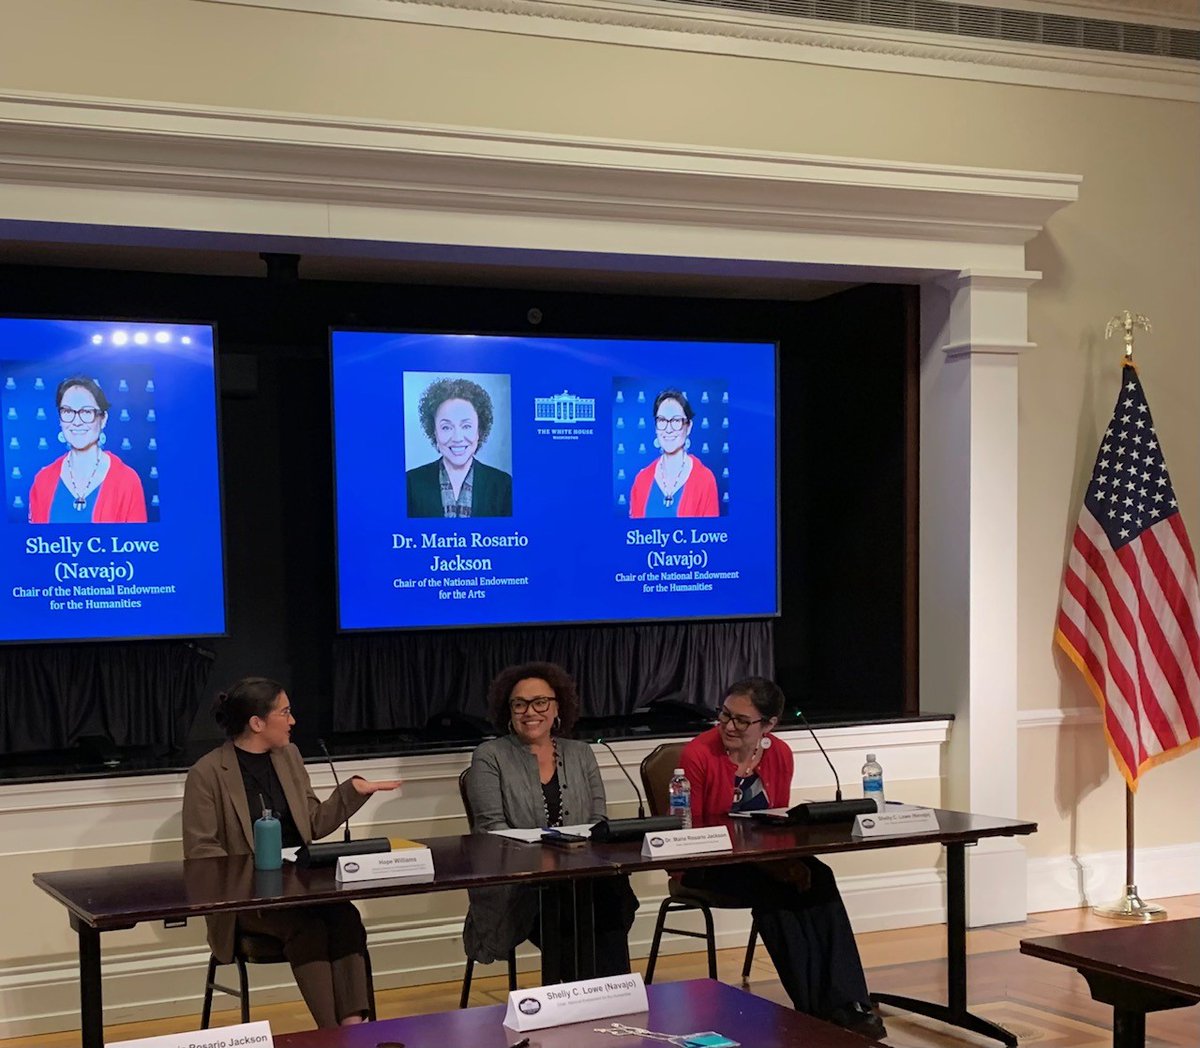 Thank you to the @WhiteHouse for inviting @NEAarts Chair Dr. Maria Rosario Jackson & @NEHchair Shelly Lowe (Navajo) to co-keynote an event for federal agency staff on how creativity, art & the humanities have inspired civic engagement, public service & social change.